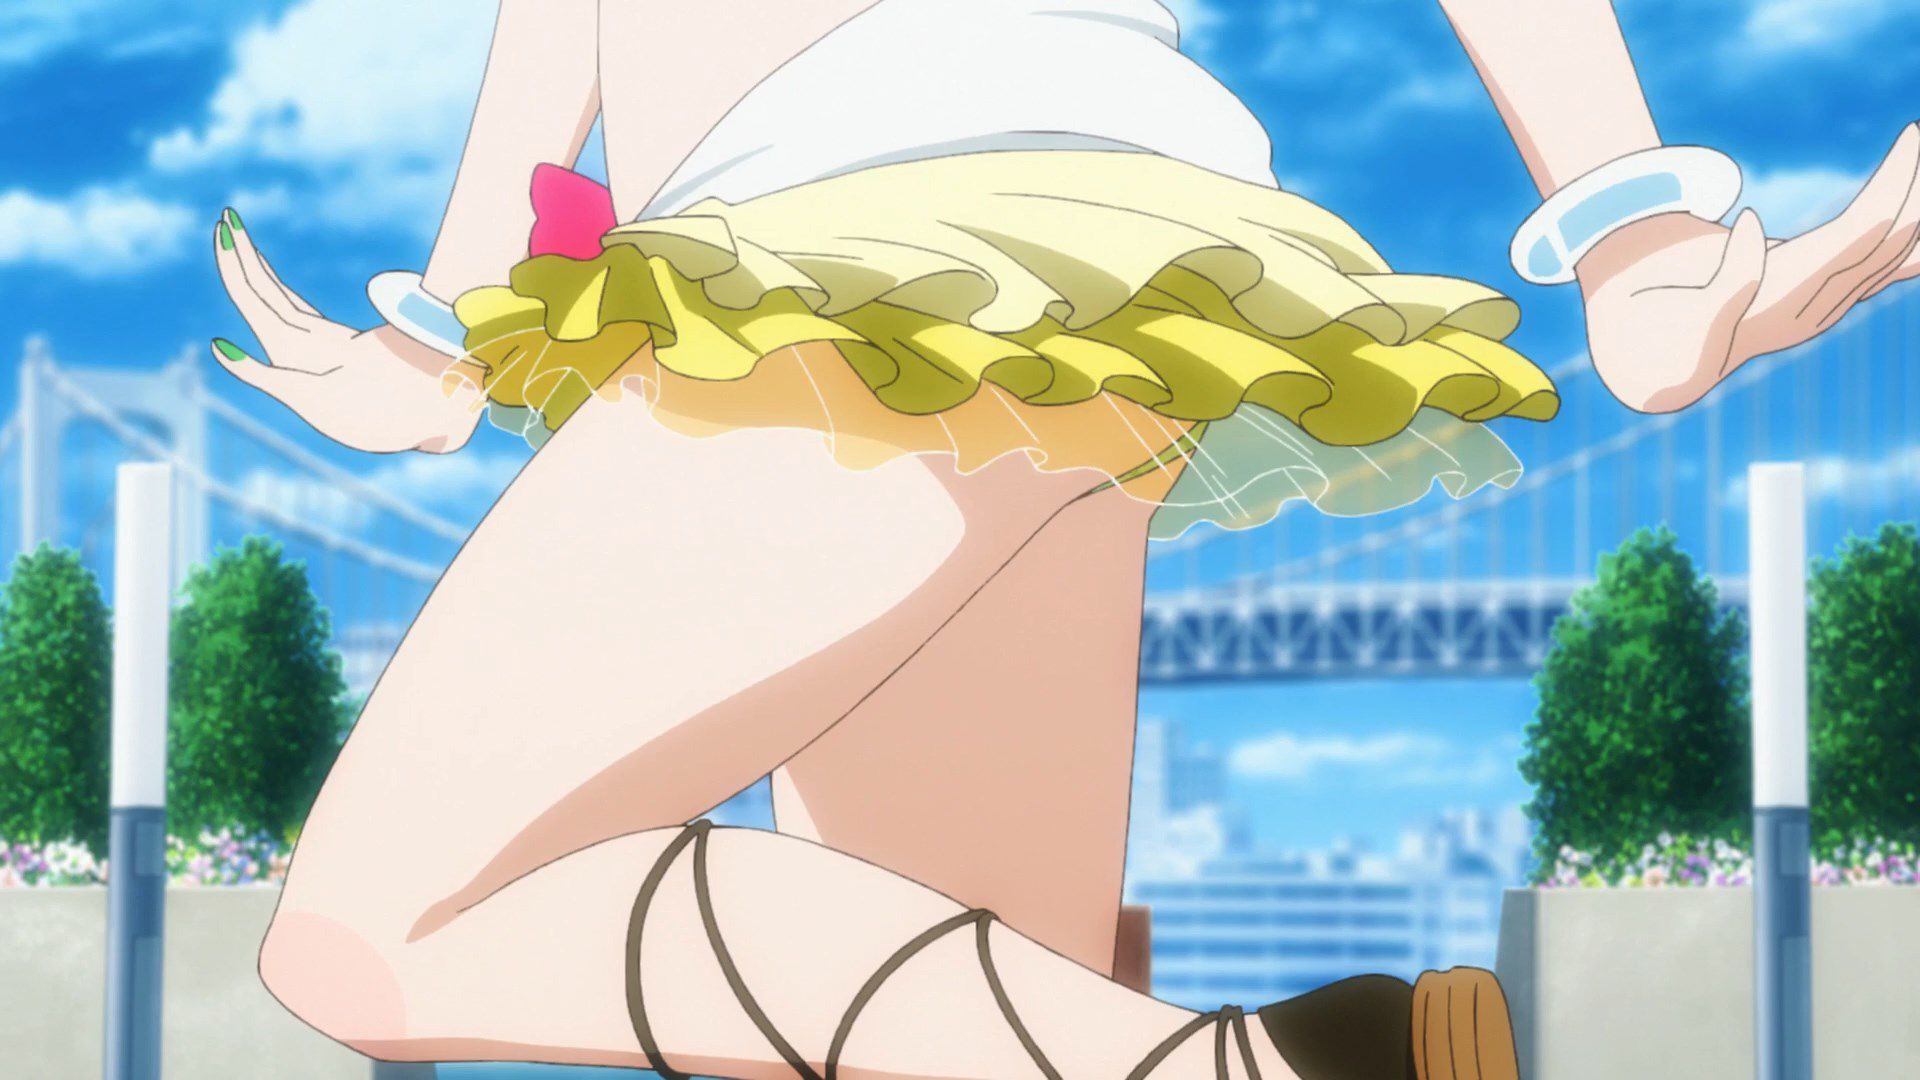 [God images] "love live! ' Μm ' PV's leg is too erotic everyone wakes up to a leg fetish of wwwww 11